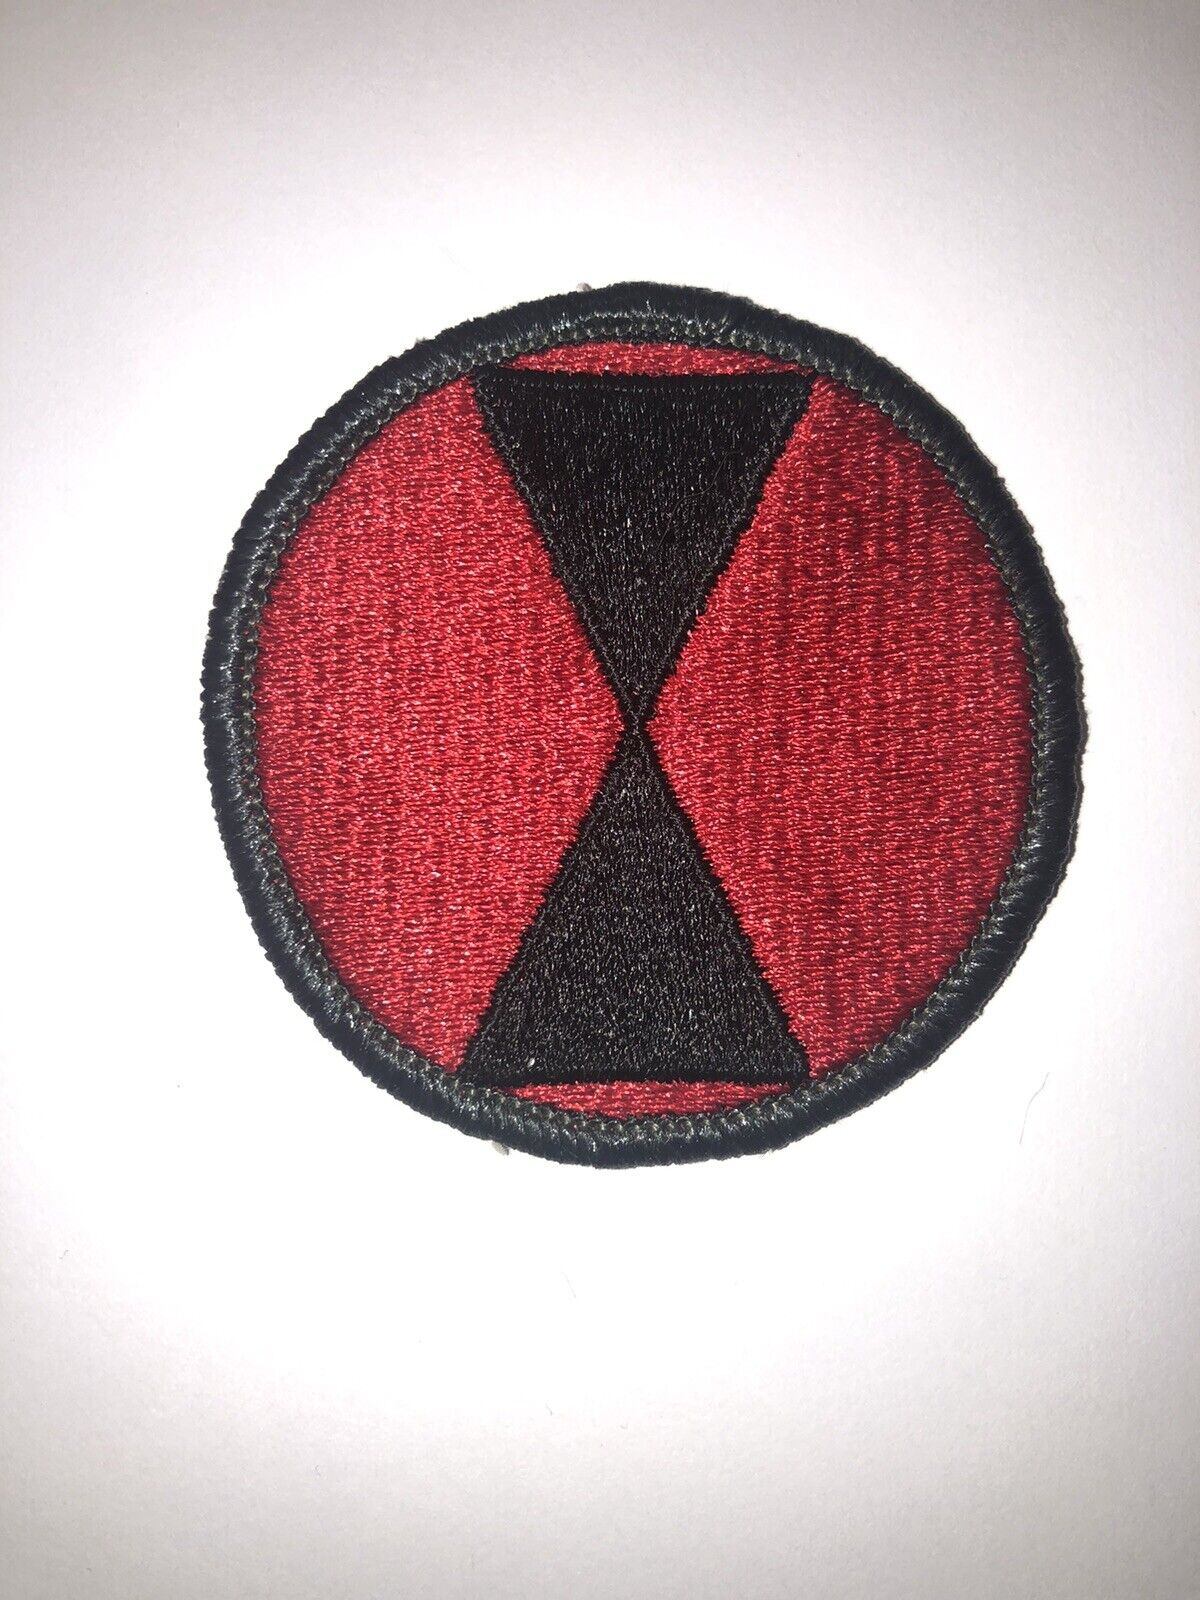 7th Infantry Division U.S. Army Shoulder Patch Insignia